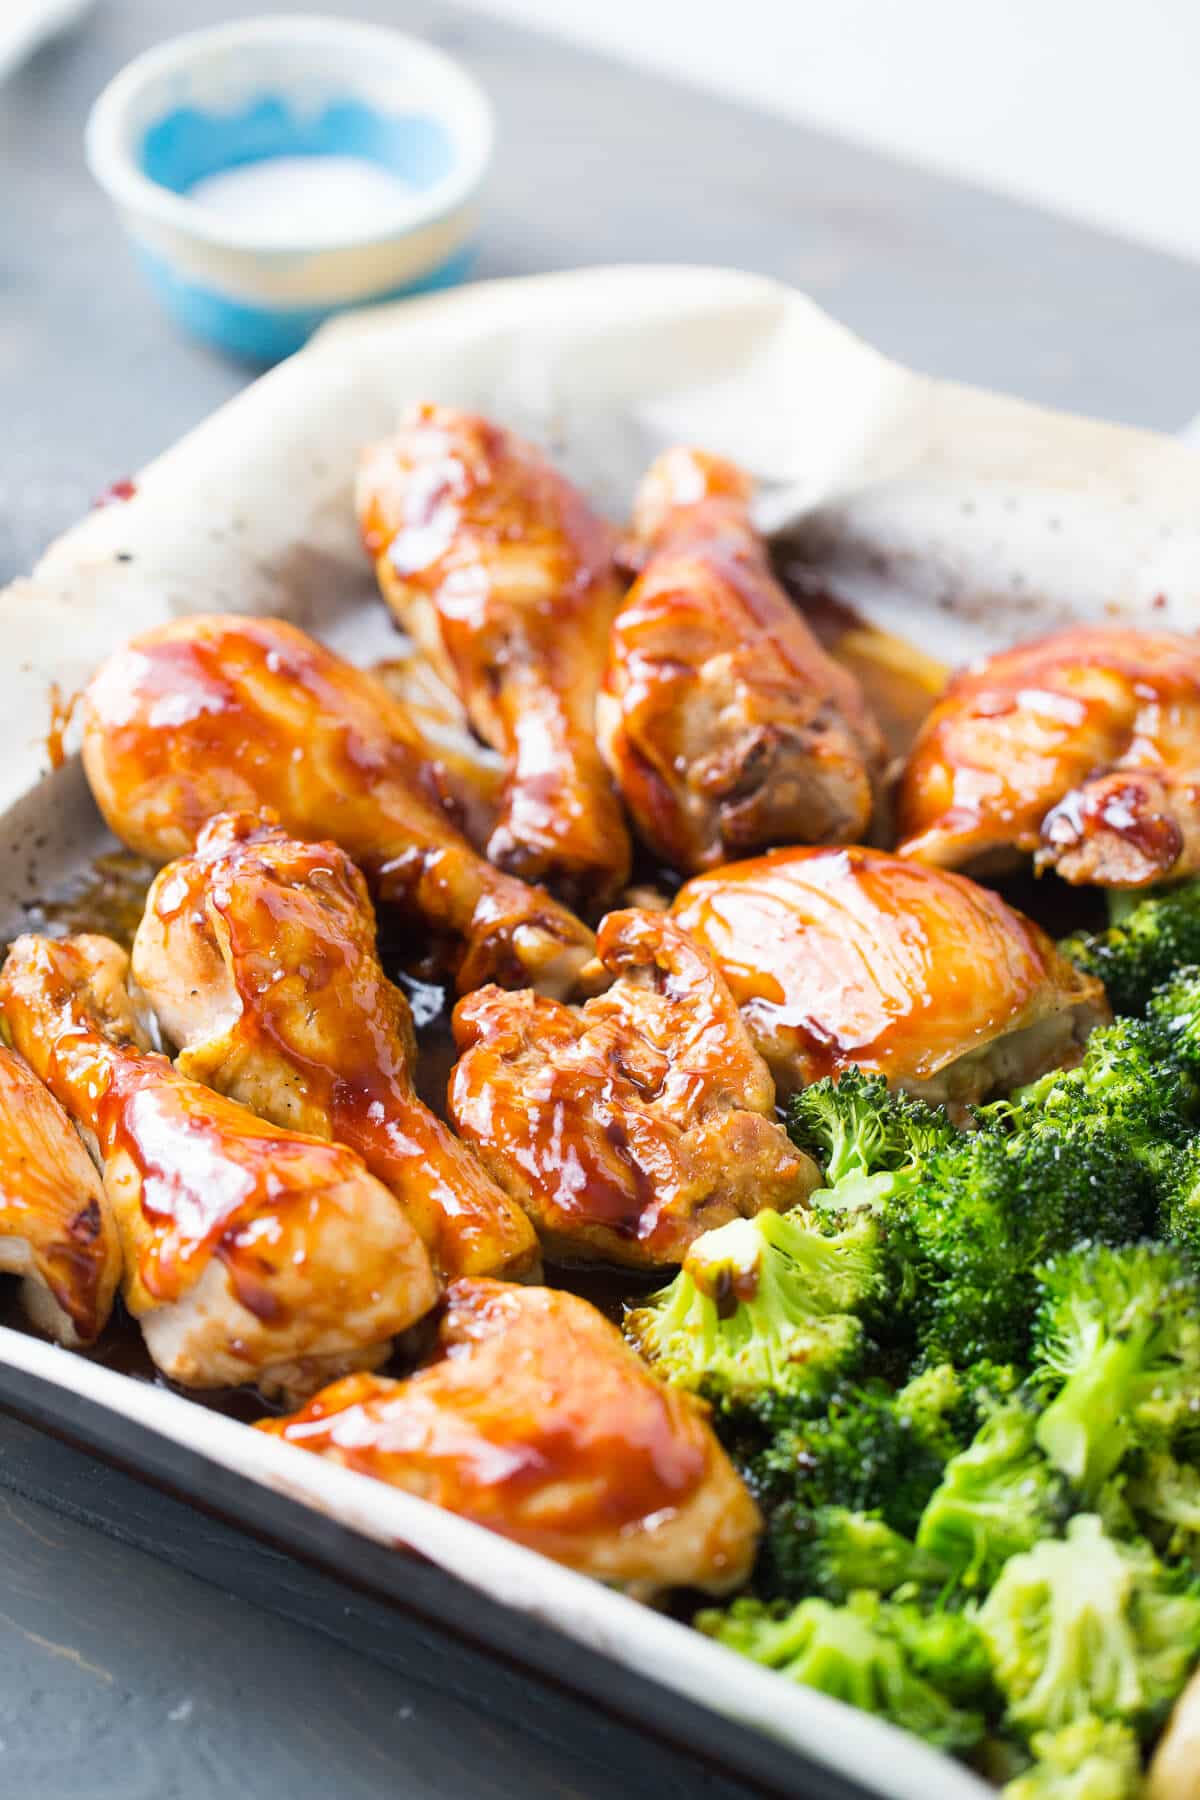 This sheet pan dinner is so simple and so good! The bourbon chicken recipe feature chicken coated with a sticky sweet bourbon glaze and served it with potatoes and broccoli!